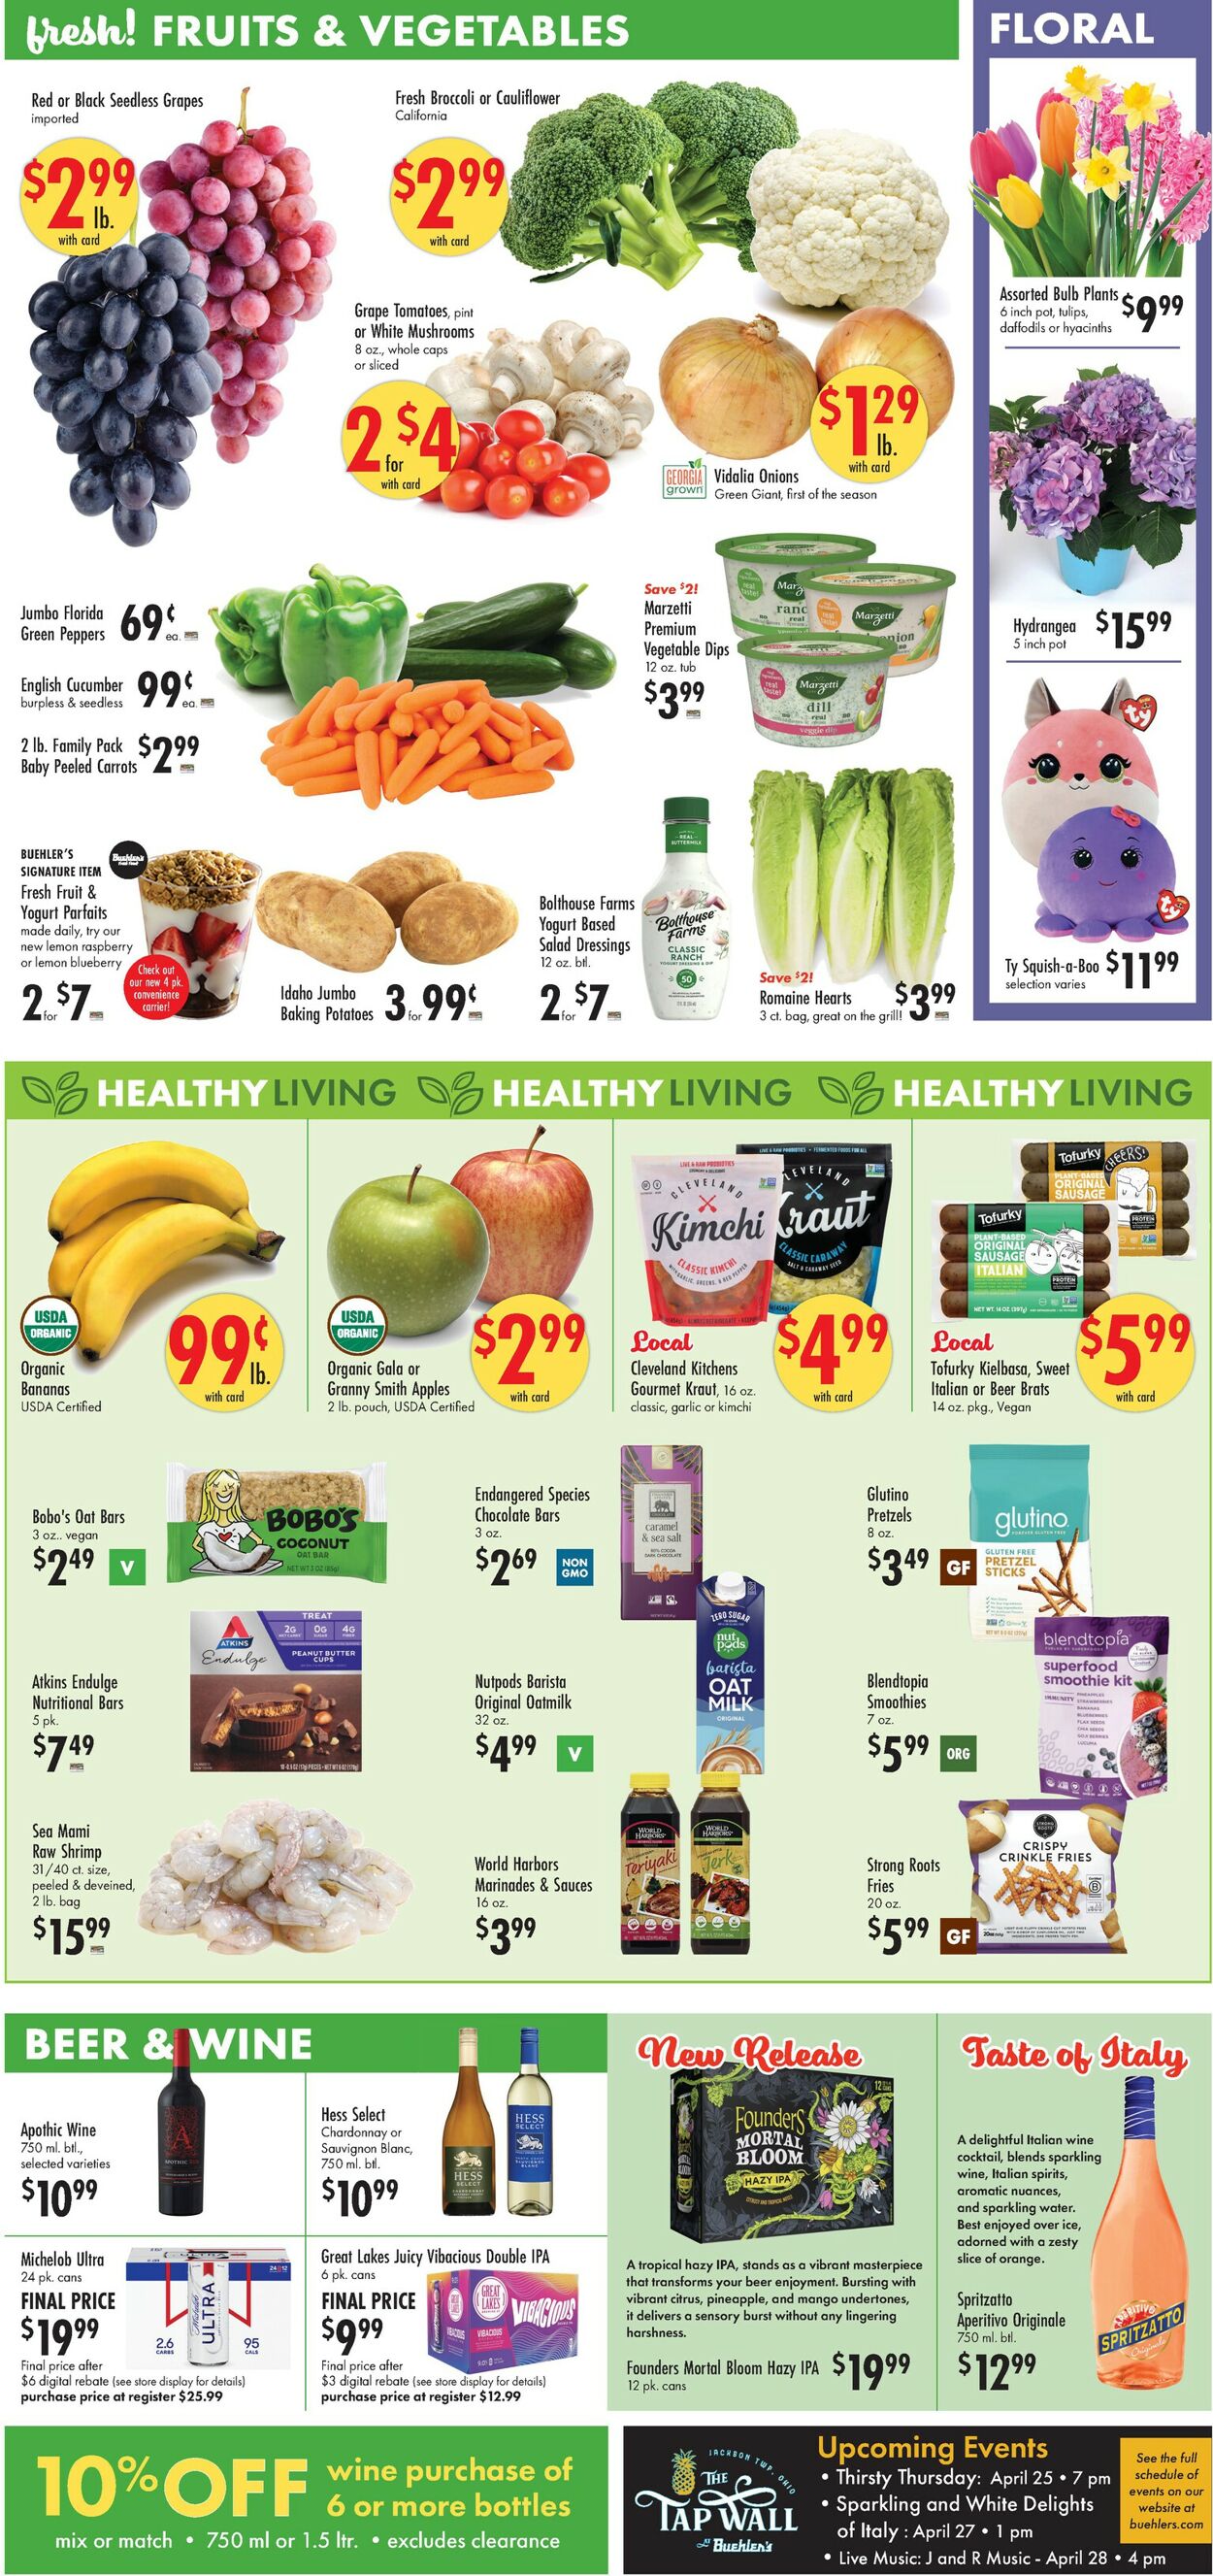 Catalogue Buehler's Fresh Foods from 04/24/2024